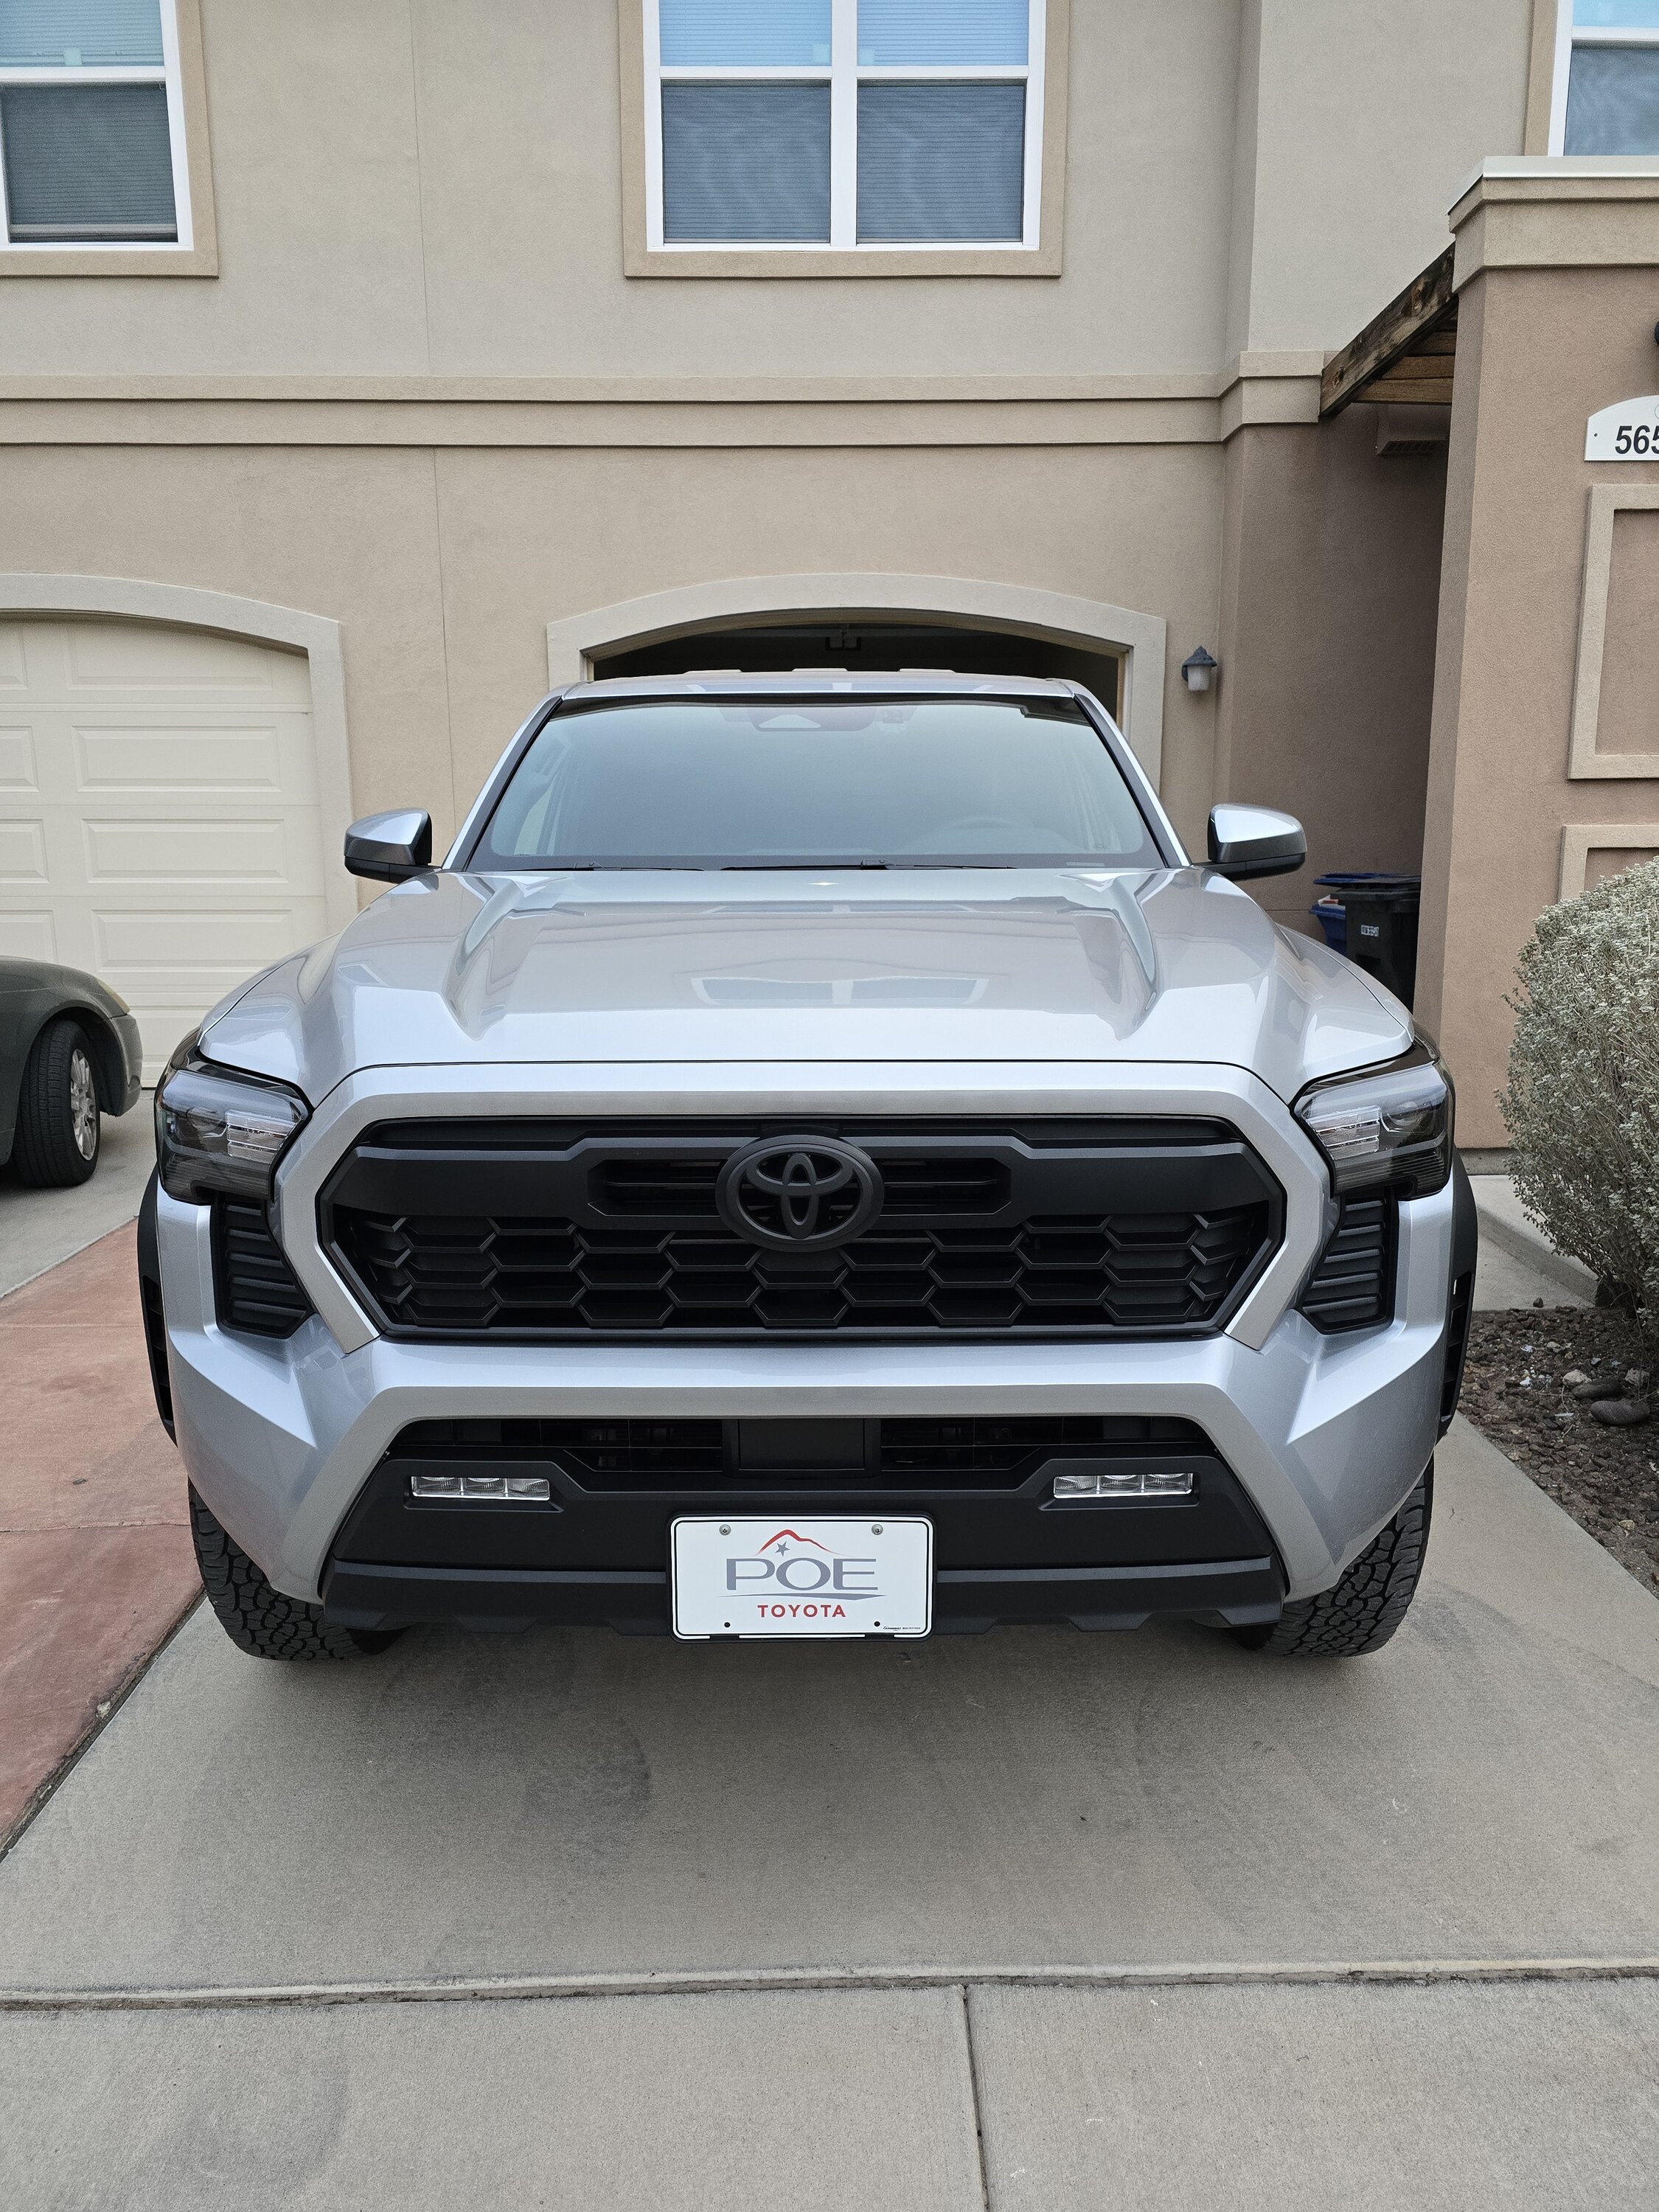 2024 Tacoma My 2024 TRD Off-Road is delivered! Loving everything so far 😍 20240206_173051